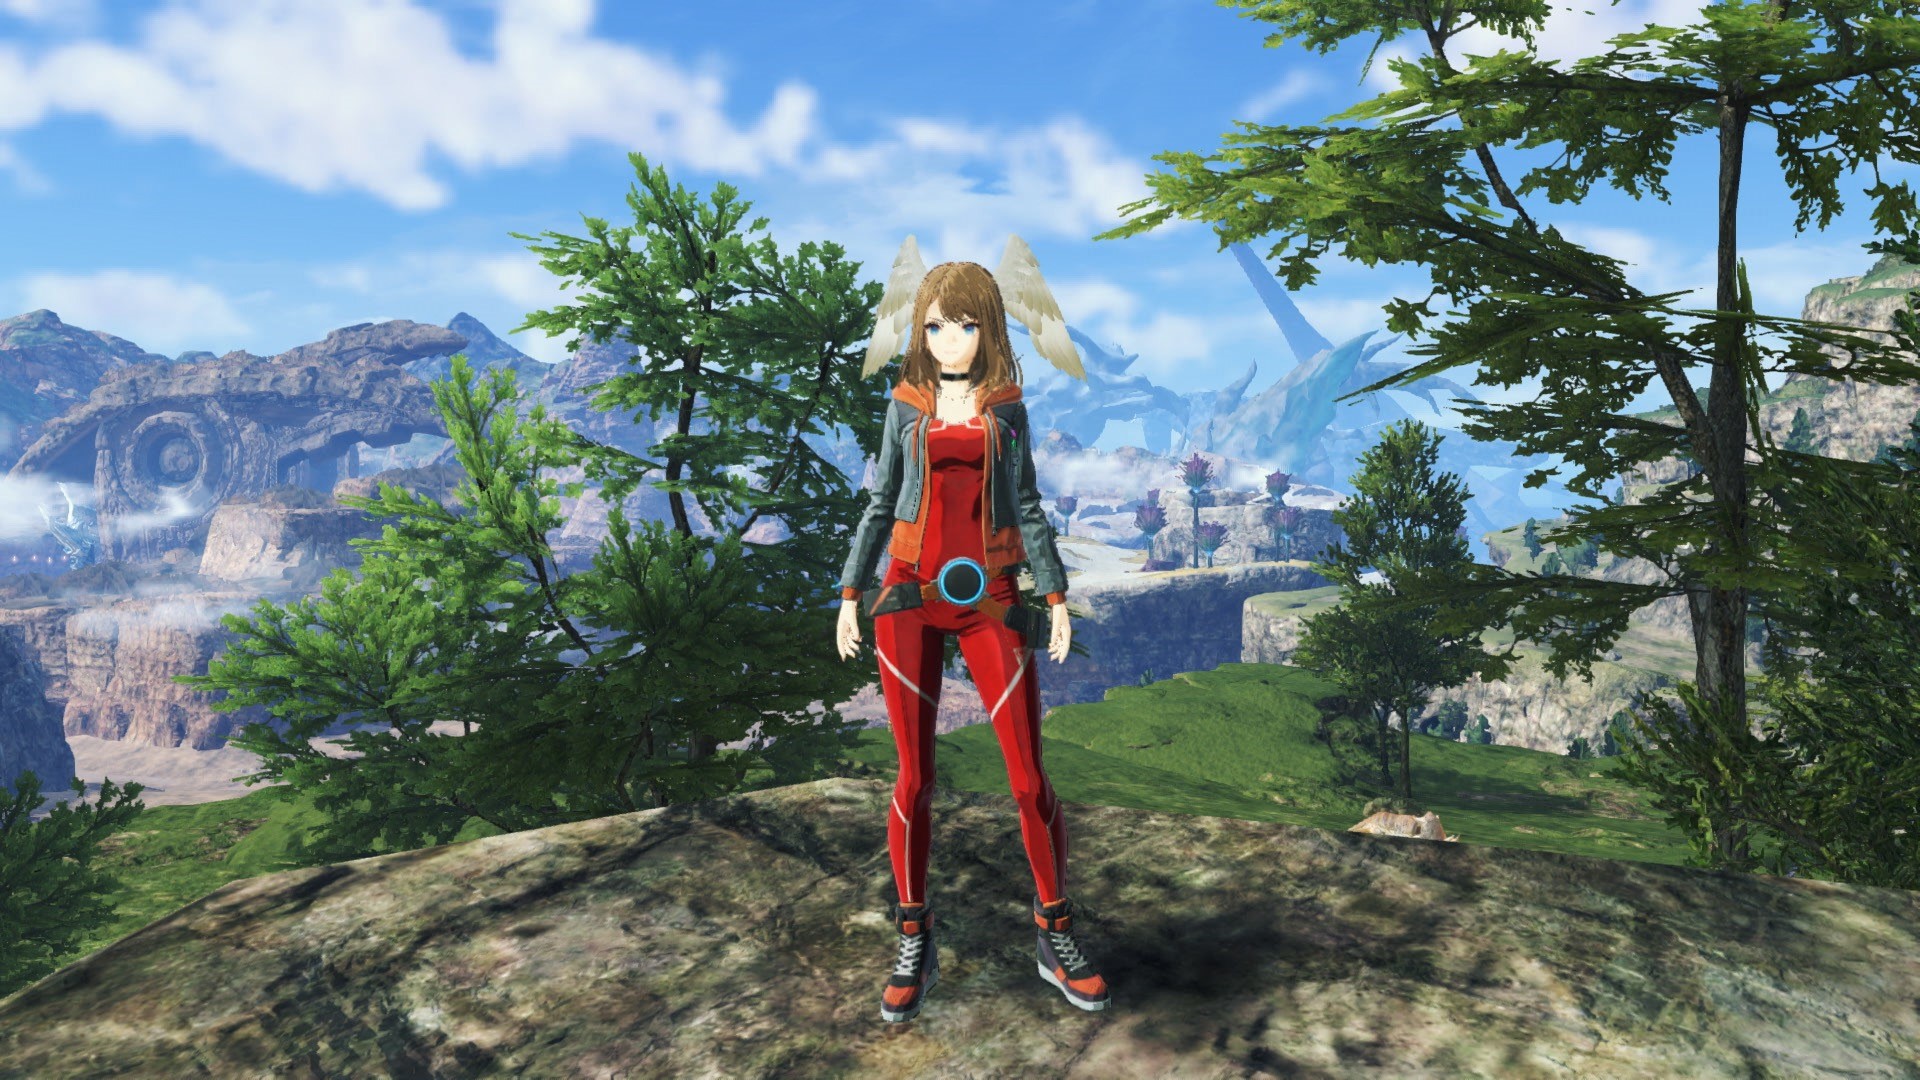 Xenoblade Chronicles 3 DLC Wave 2 and Update 1.2.0 not correctly work